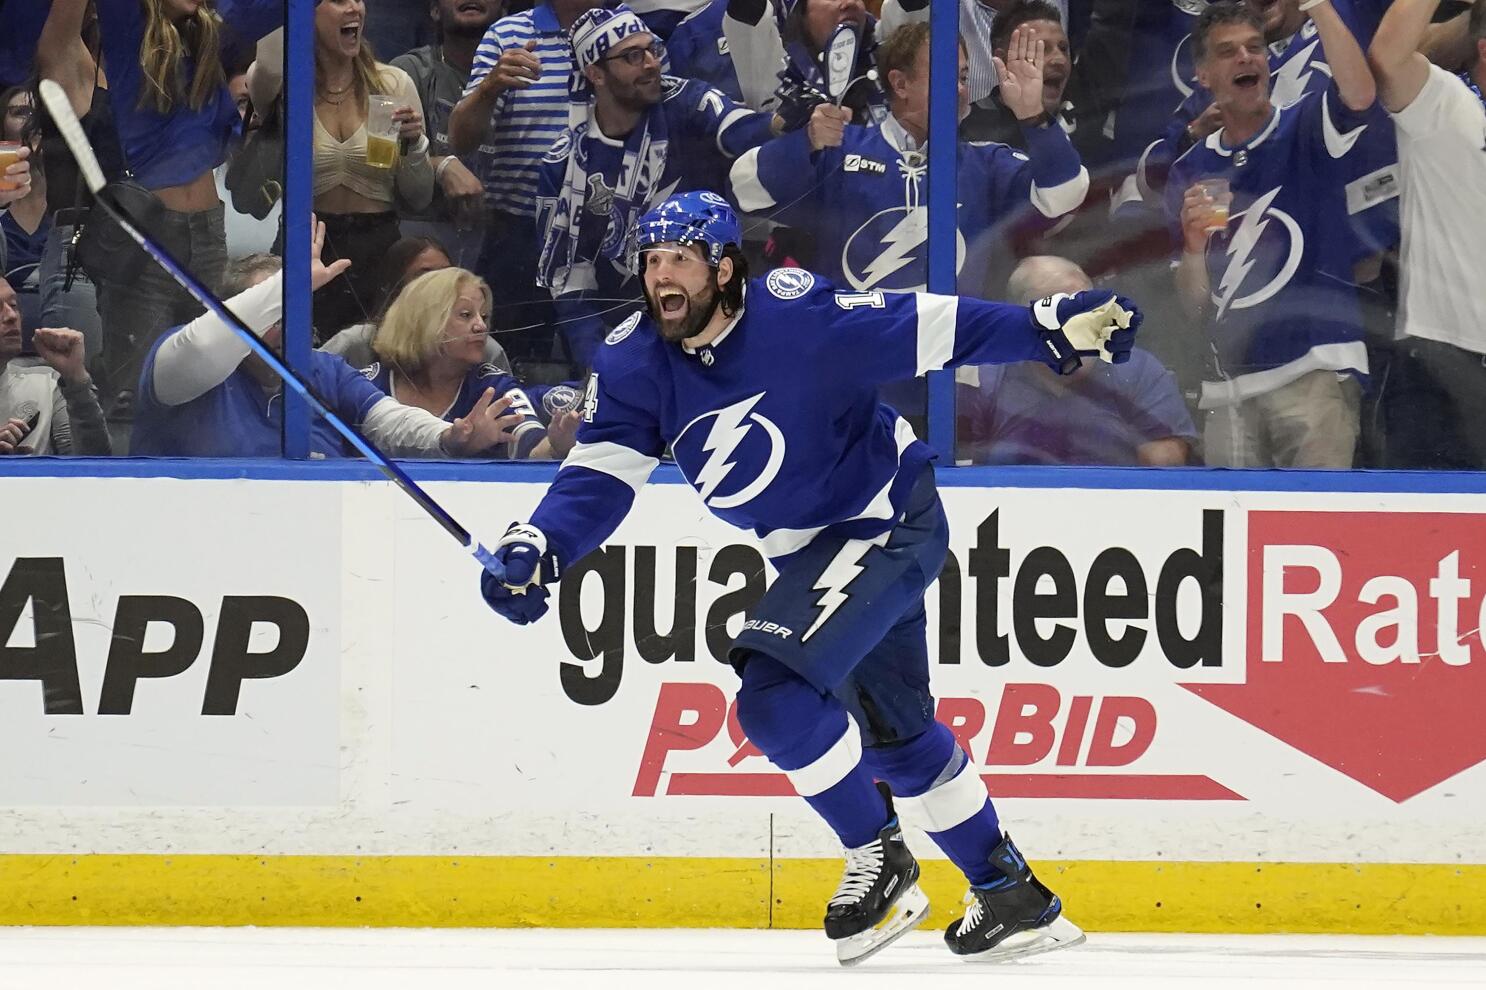 Steven Stamkos scores twice, Lightning put Panthers on brink of elimination  with Game 3 victory - The Boston Globe